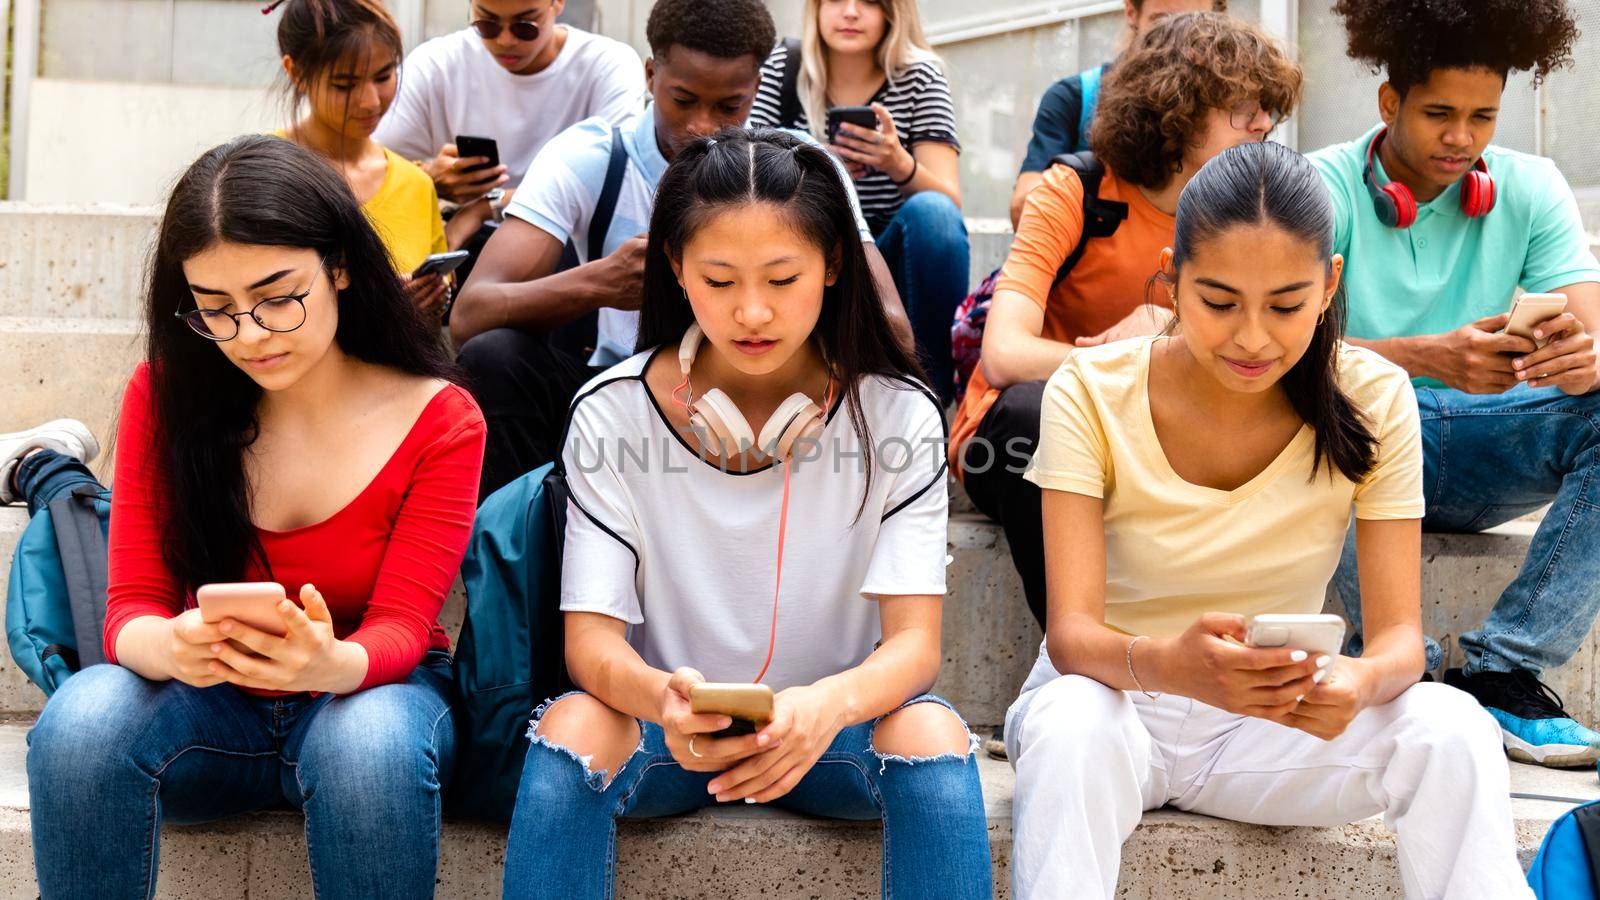 Group of multiracial high school students using mobile phone ignoring each other. Addicted to social media. by Hoverstock